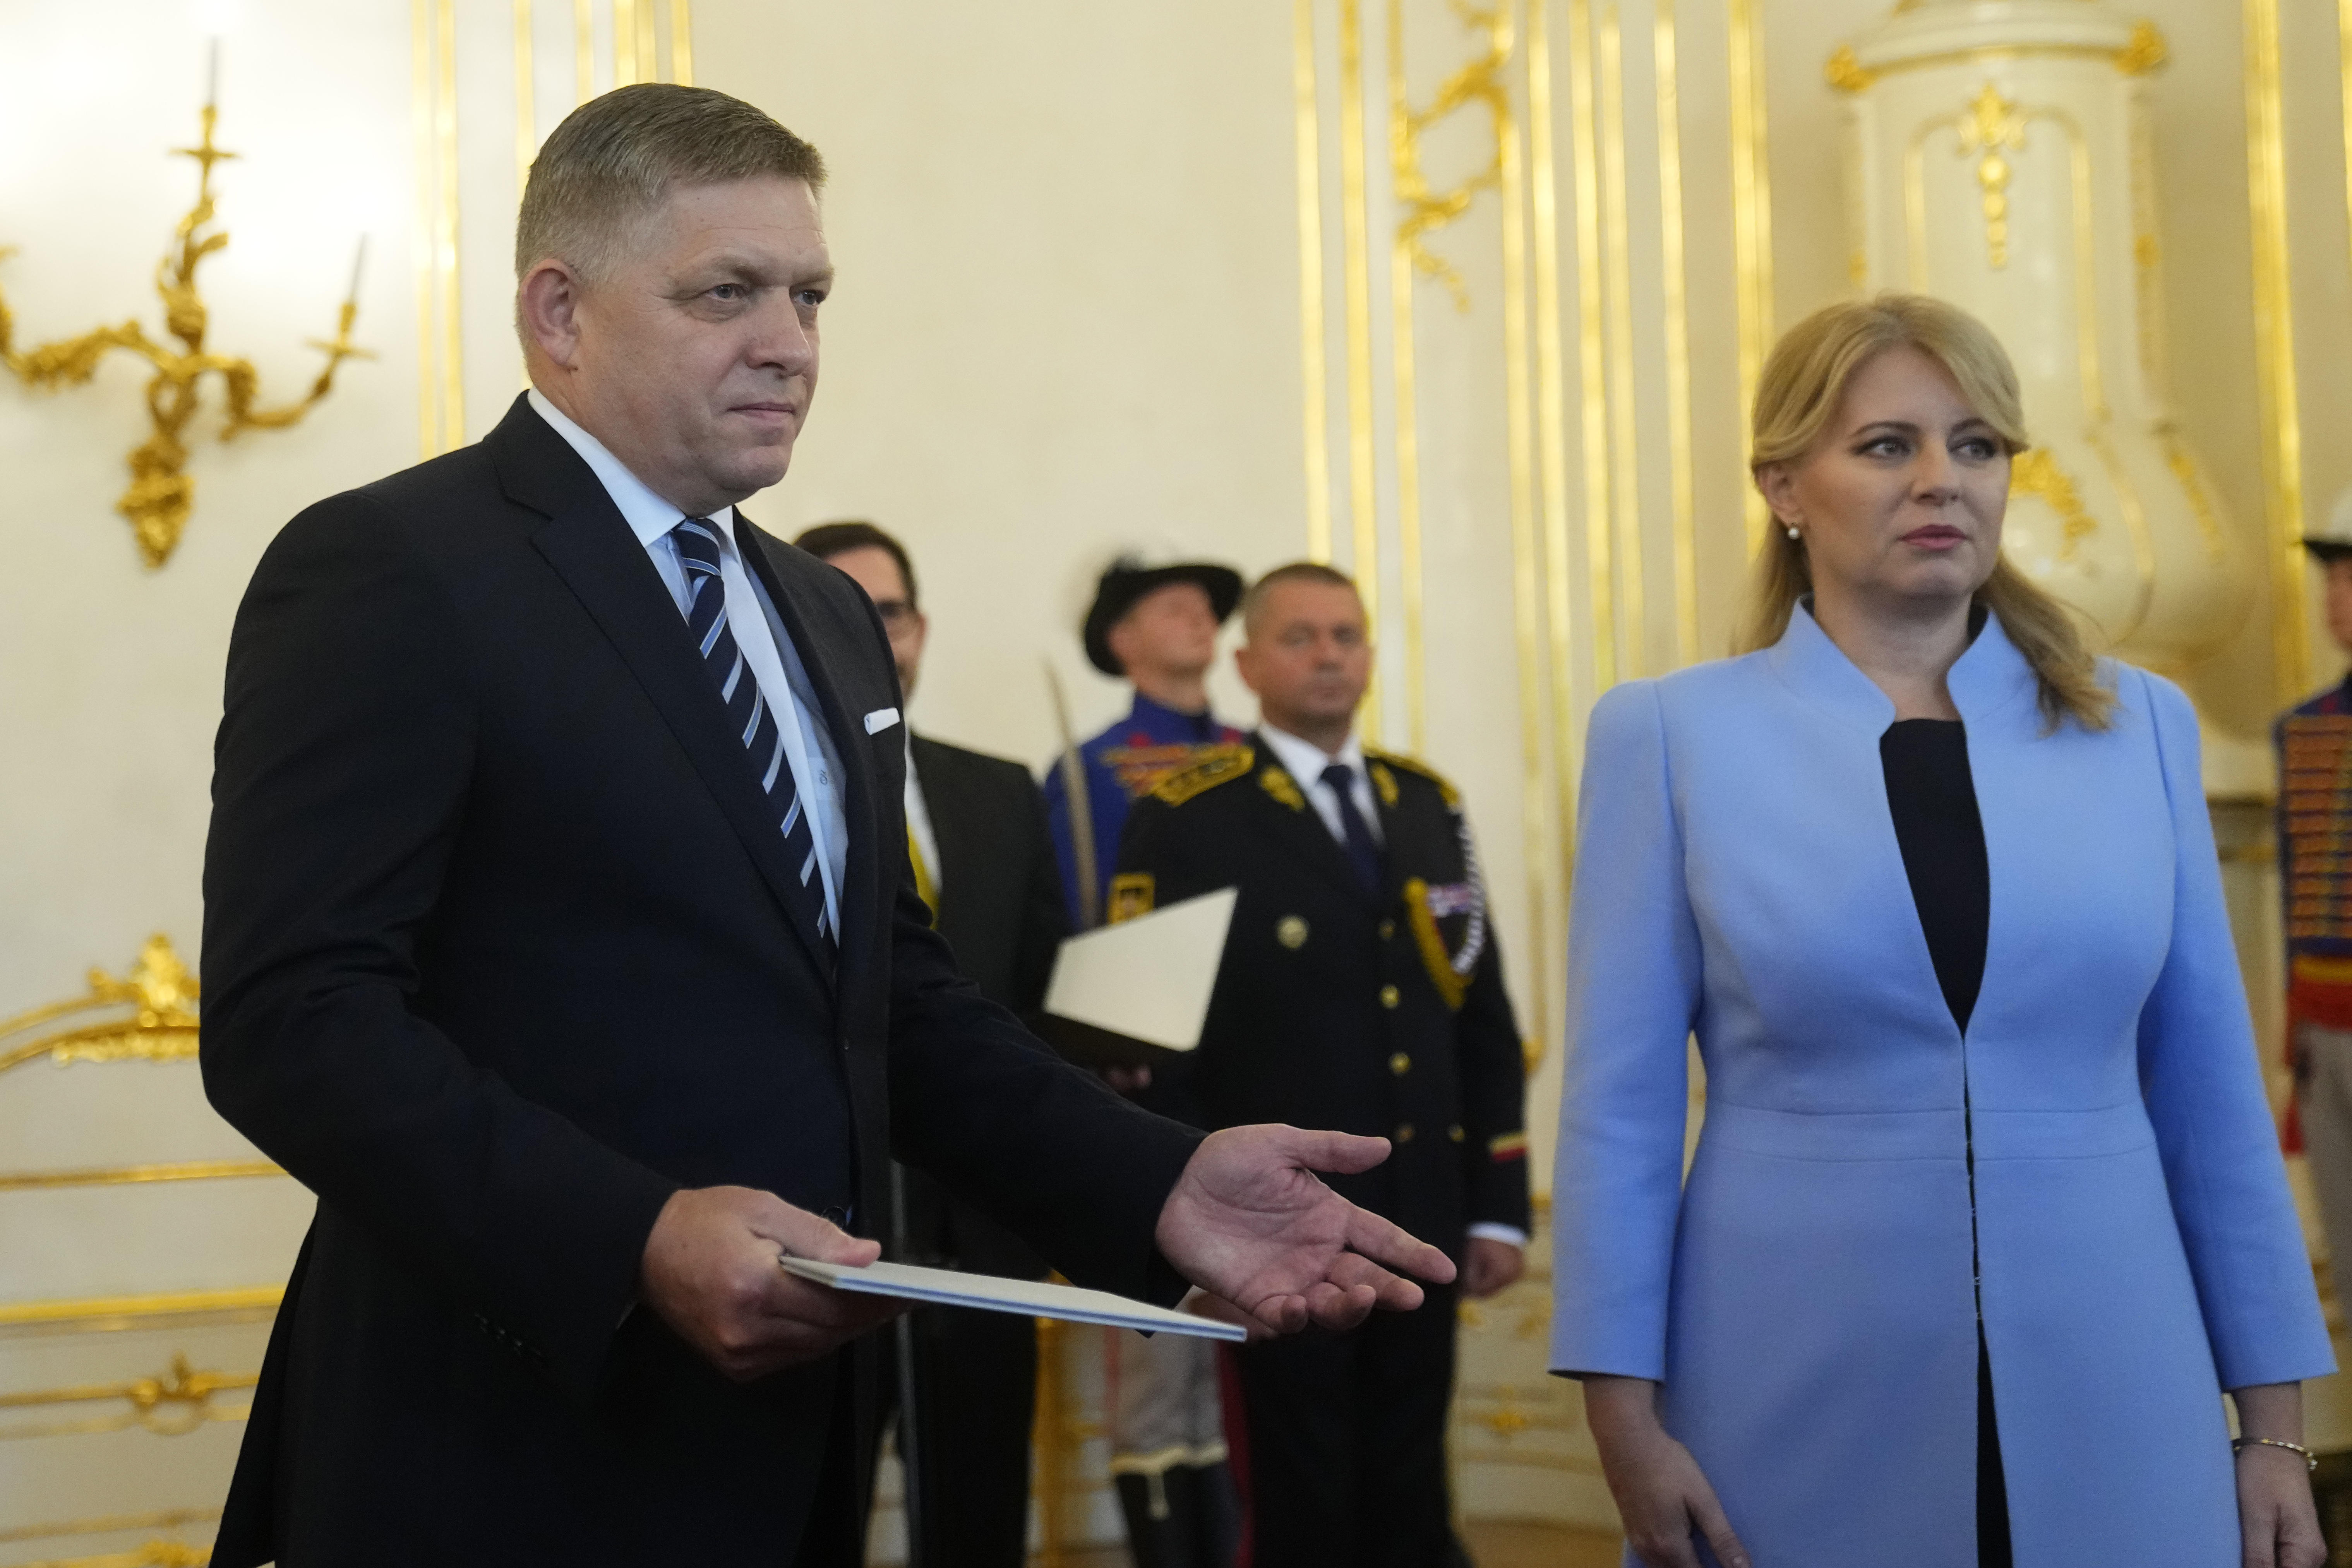 FILE - Slovakia's President Zuzana Caputova, right, and newly appointed Prime Minister Robert Fico pose for a photo during a swear in ceremony at the Presidential Palace in Bratislava, Slovakia, Wednesday, Oct. 25, 2023. Prime Minister Robert Fico returned to power in Slovakia last year. Having previously served twice as prime minister, from 2006 to 2010 and again from 2012 to 2018, the 59-year-old's third term made him the longest-serving head of government in Slovakia’s history. (AP Photo/Petr David Josek, File)